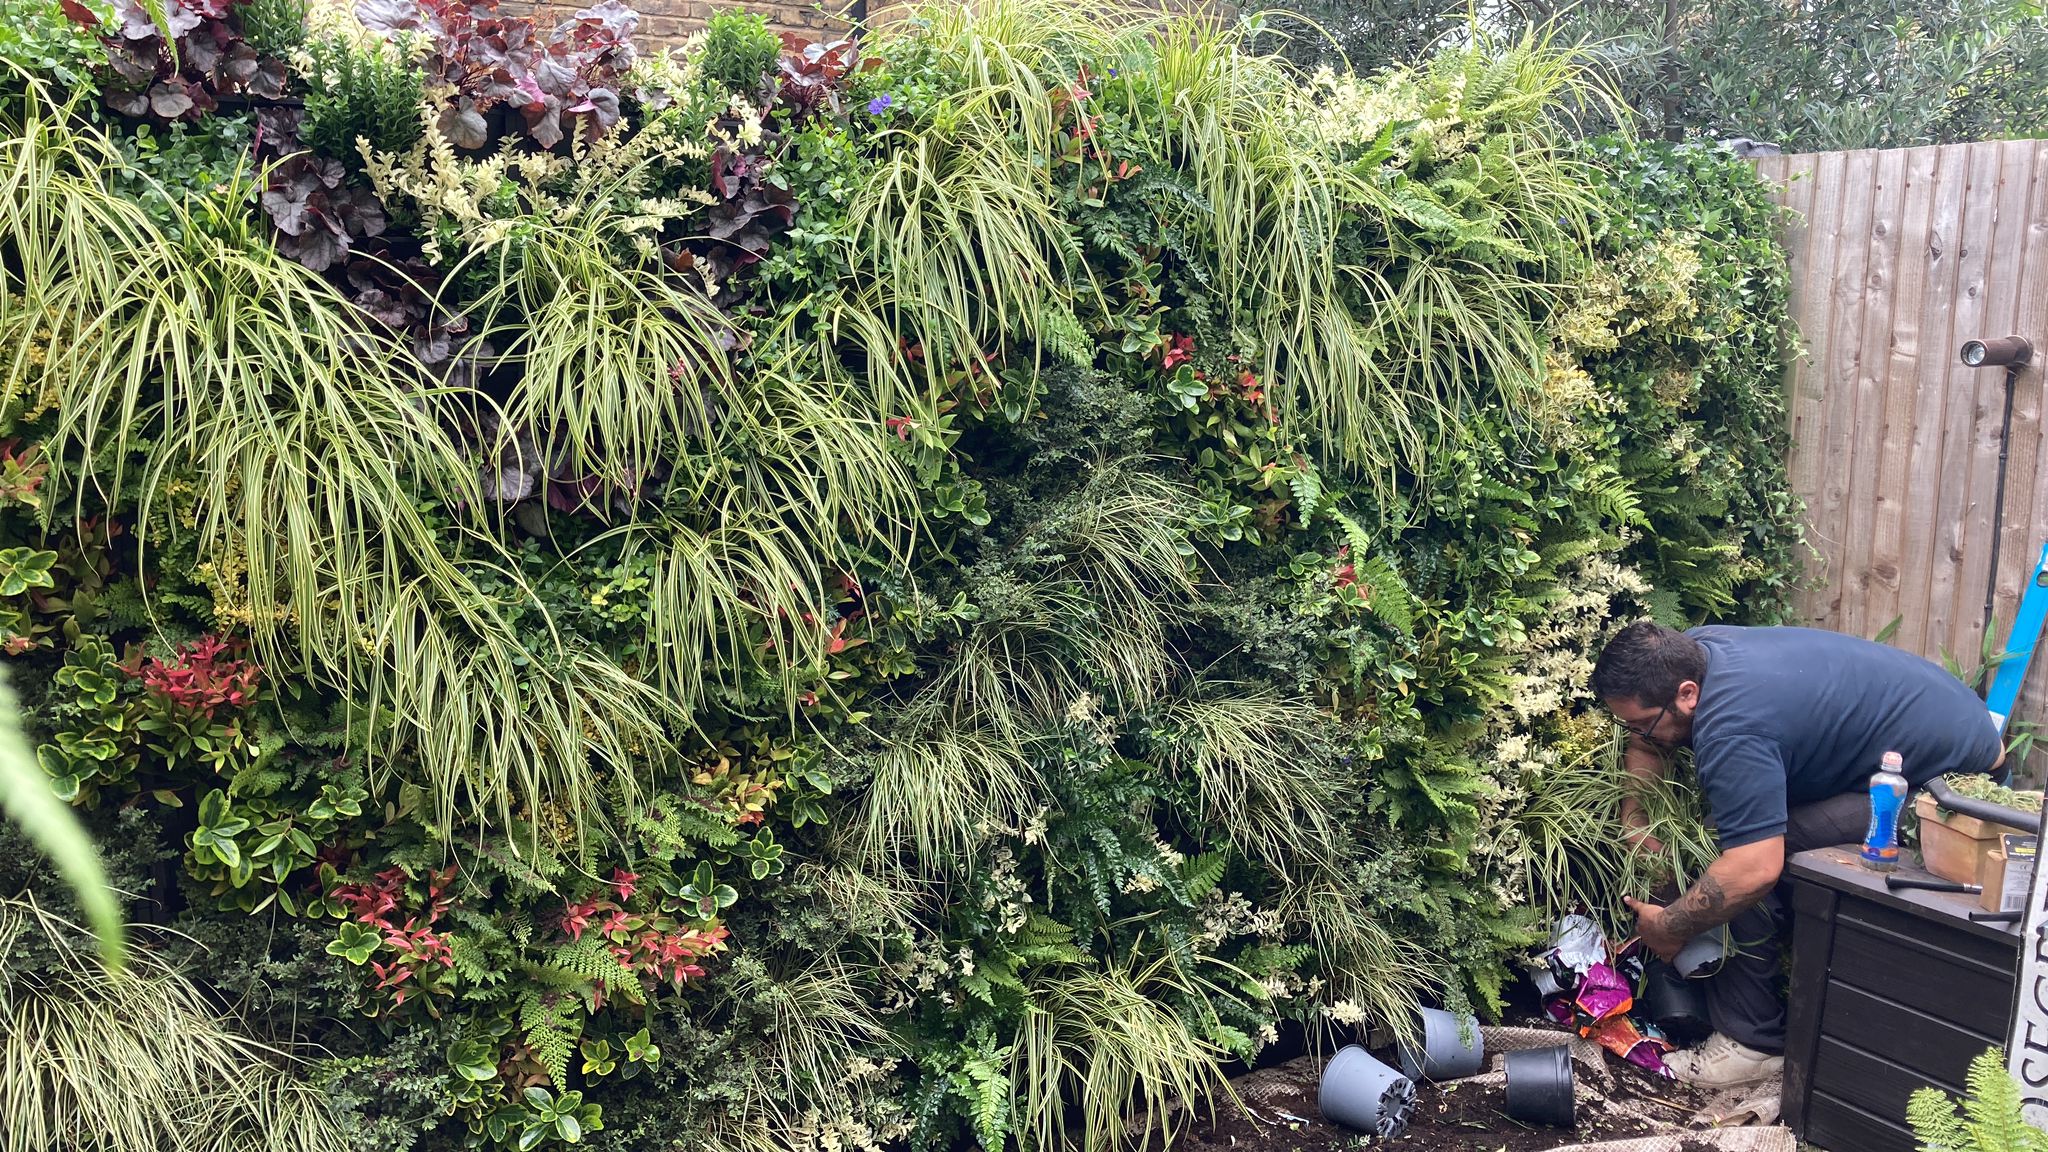 advantages of living walls over moss walls aren't limited to the rich texture and colour